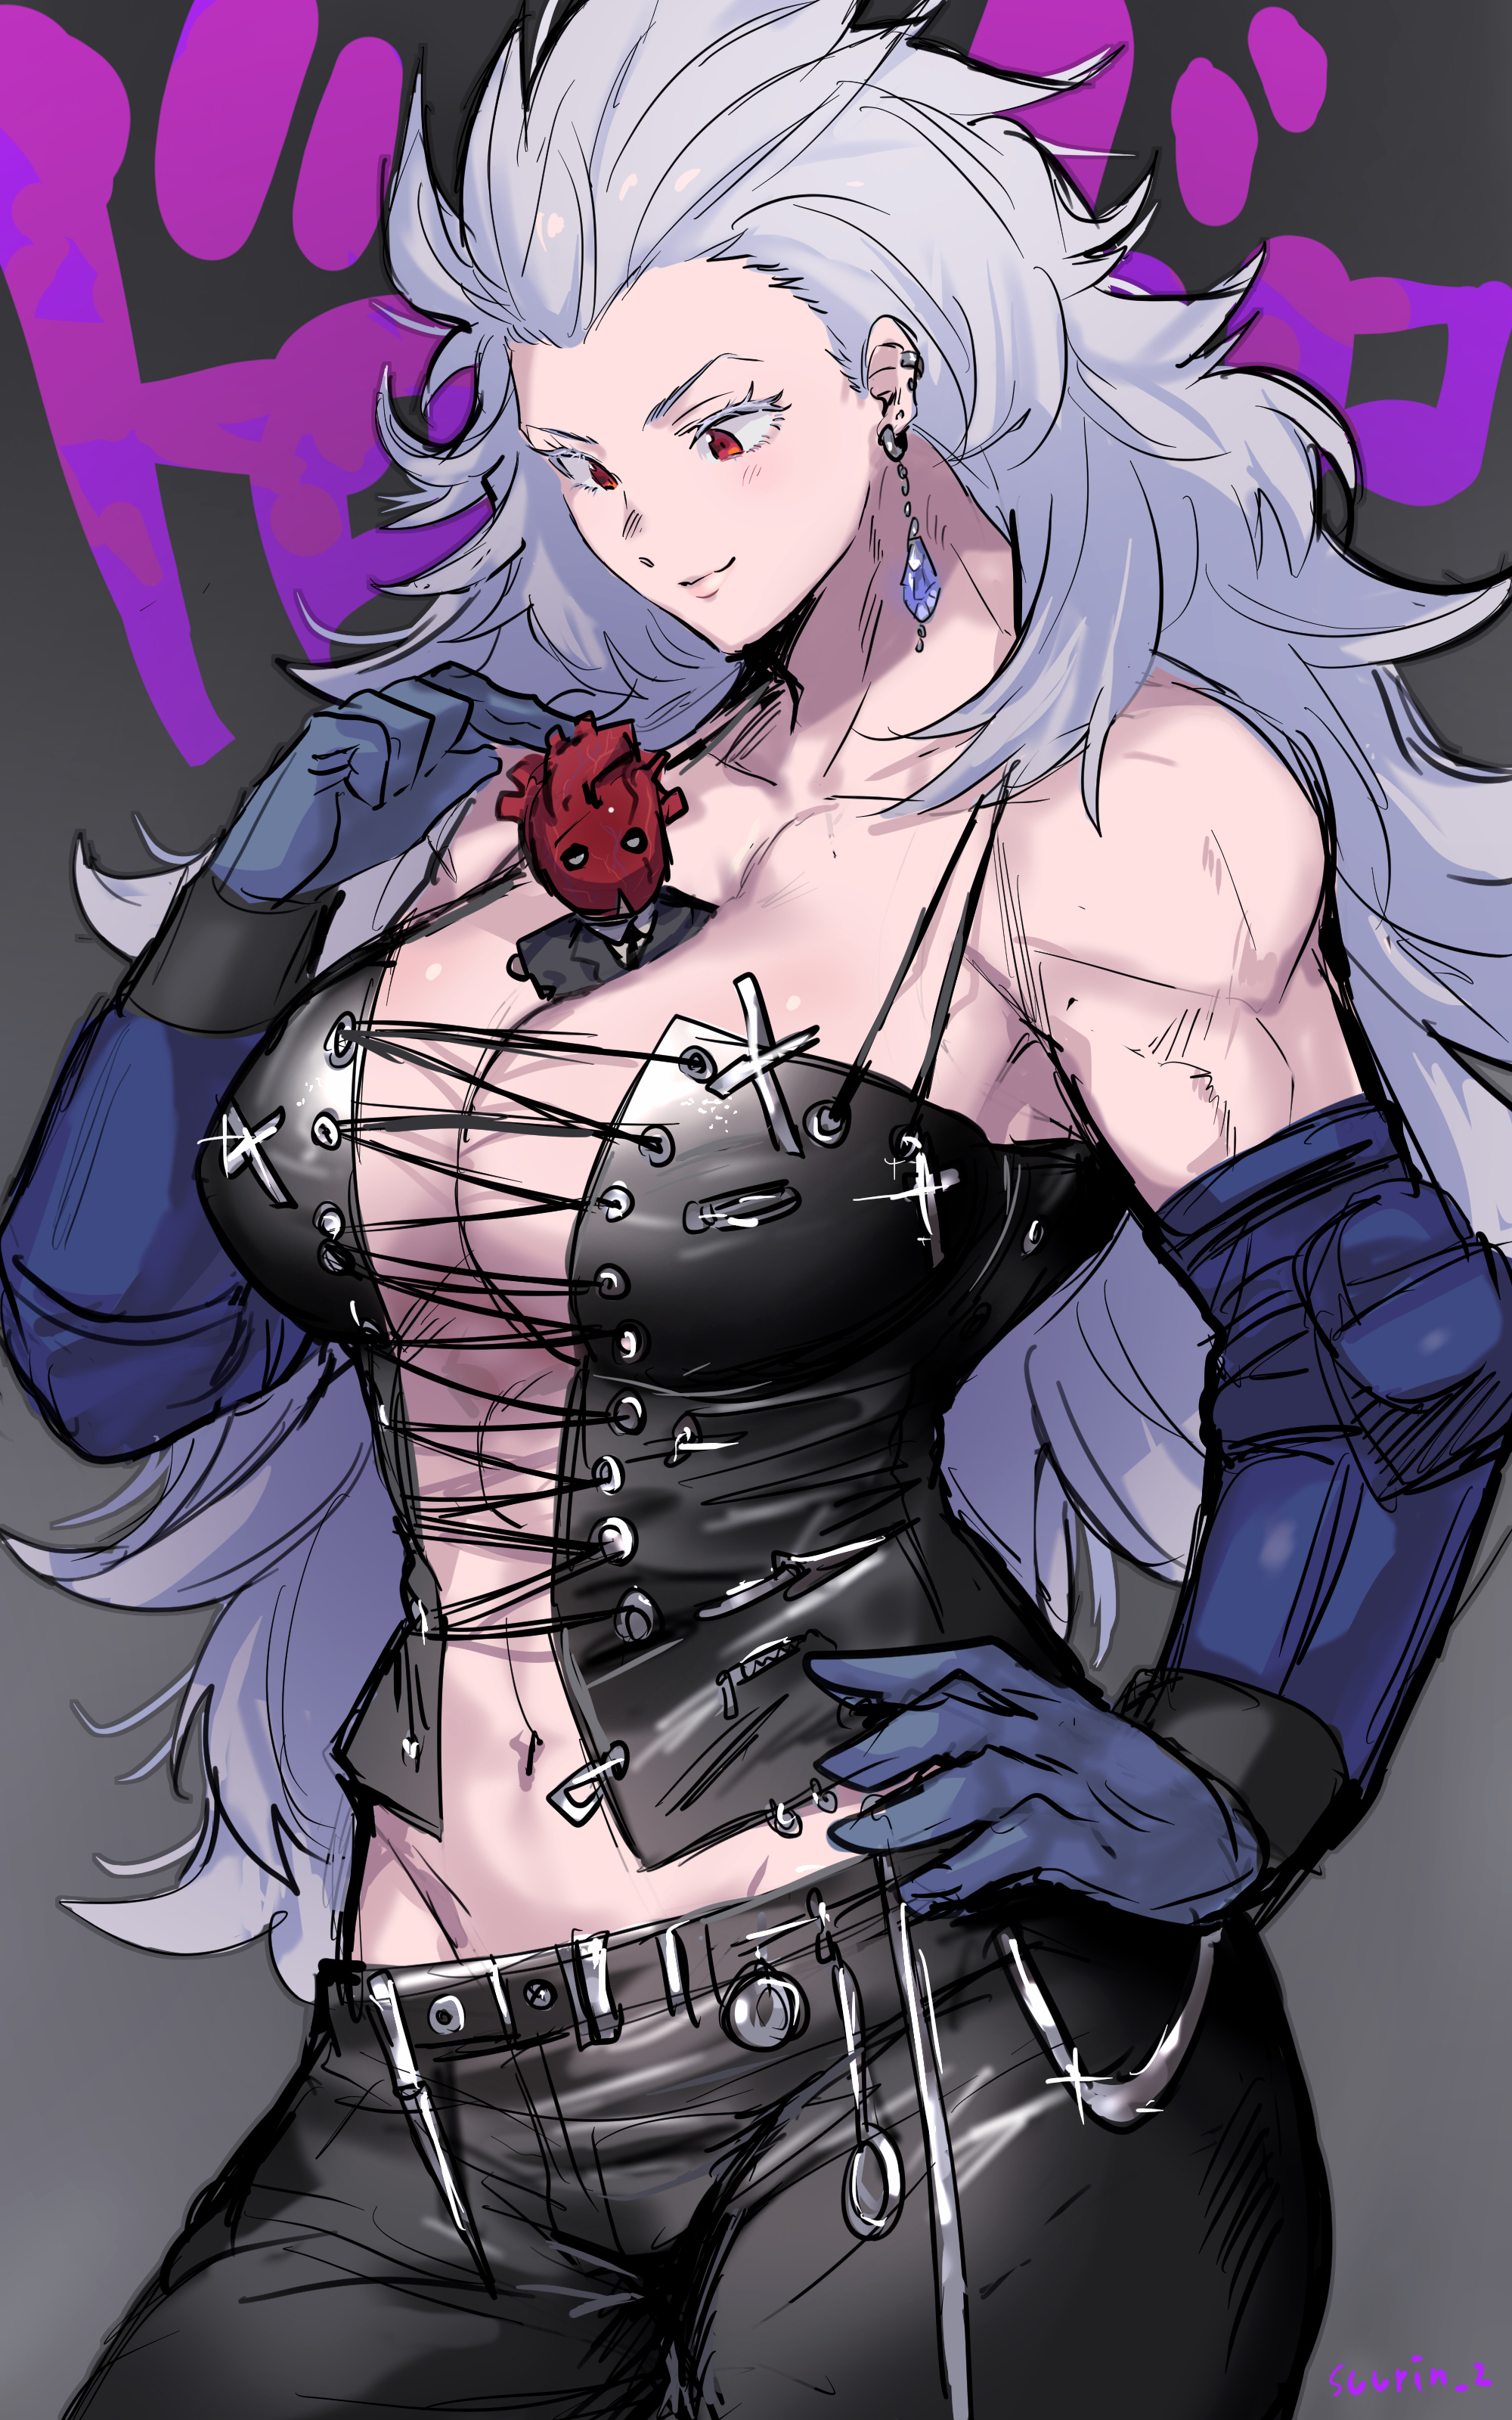 Anime 2000x3200 Dorohedoro anime girls simple background 2D long hair gray hair huge breasts black corset cleavage mask red eyes thighs abs biceps muscular belly button smiling kanji fan art pierced ear Noi (Dorohedoro) Shin (Dorohedoro) anime